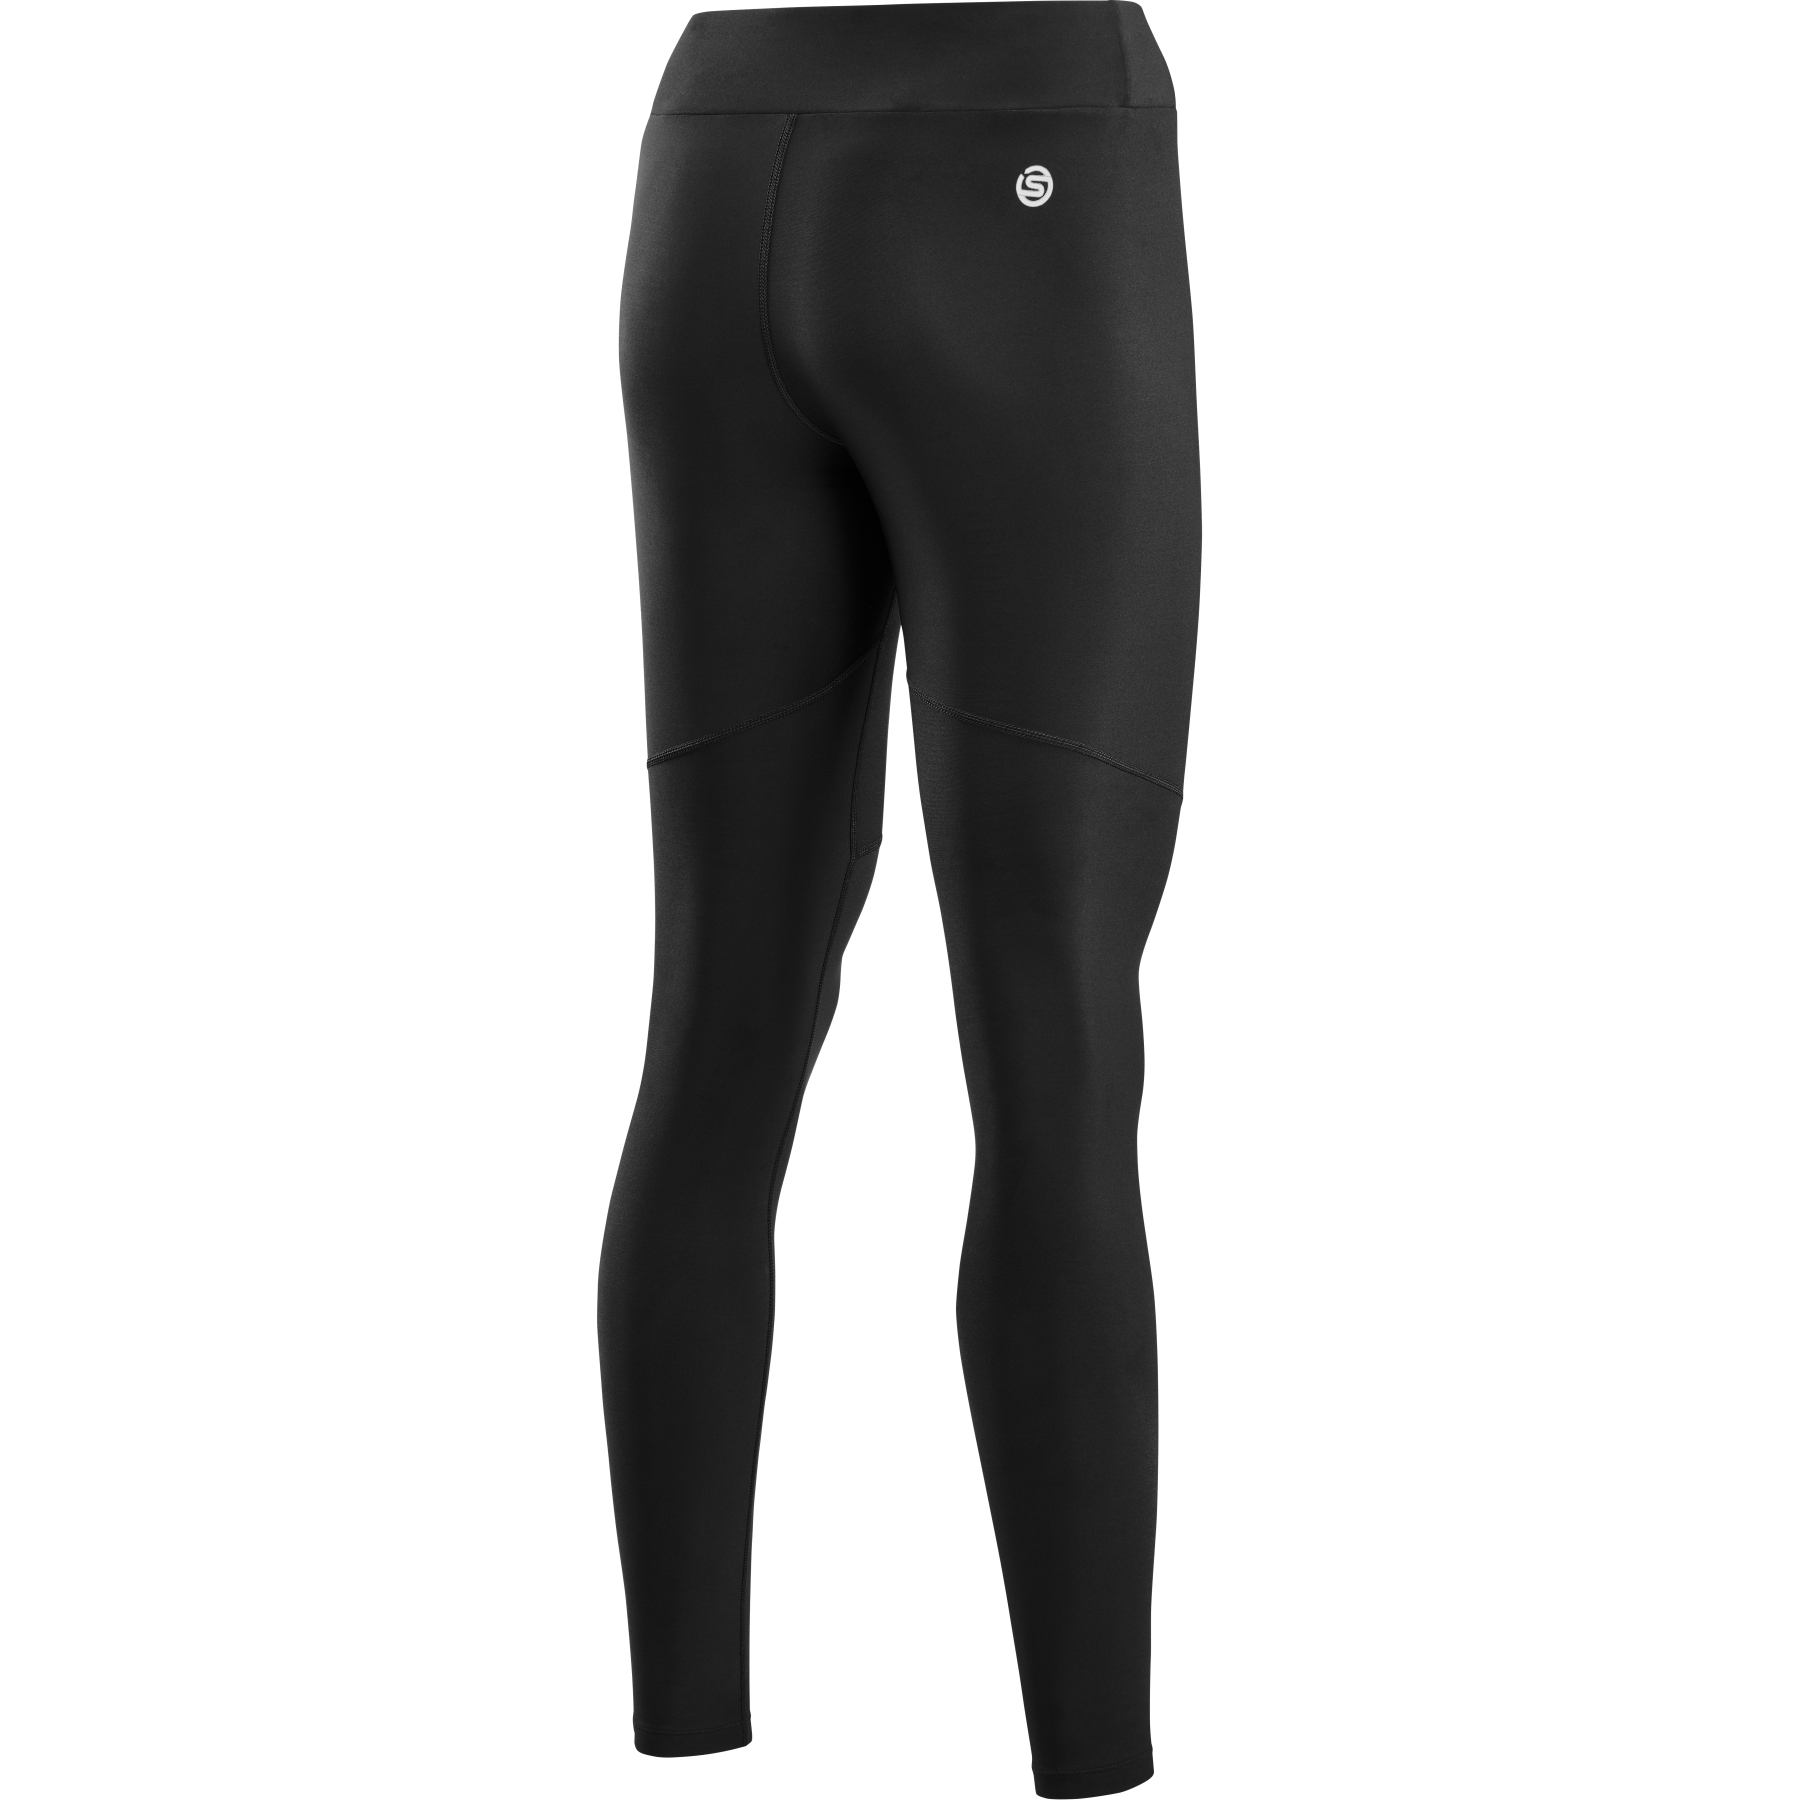 SKINS Compression 3-Series Women's Soft Long Tights - Black